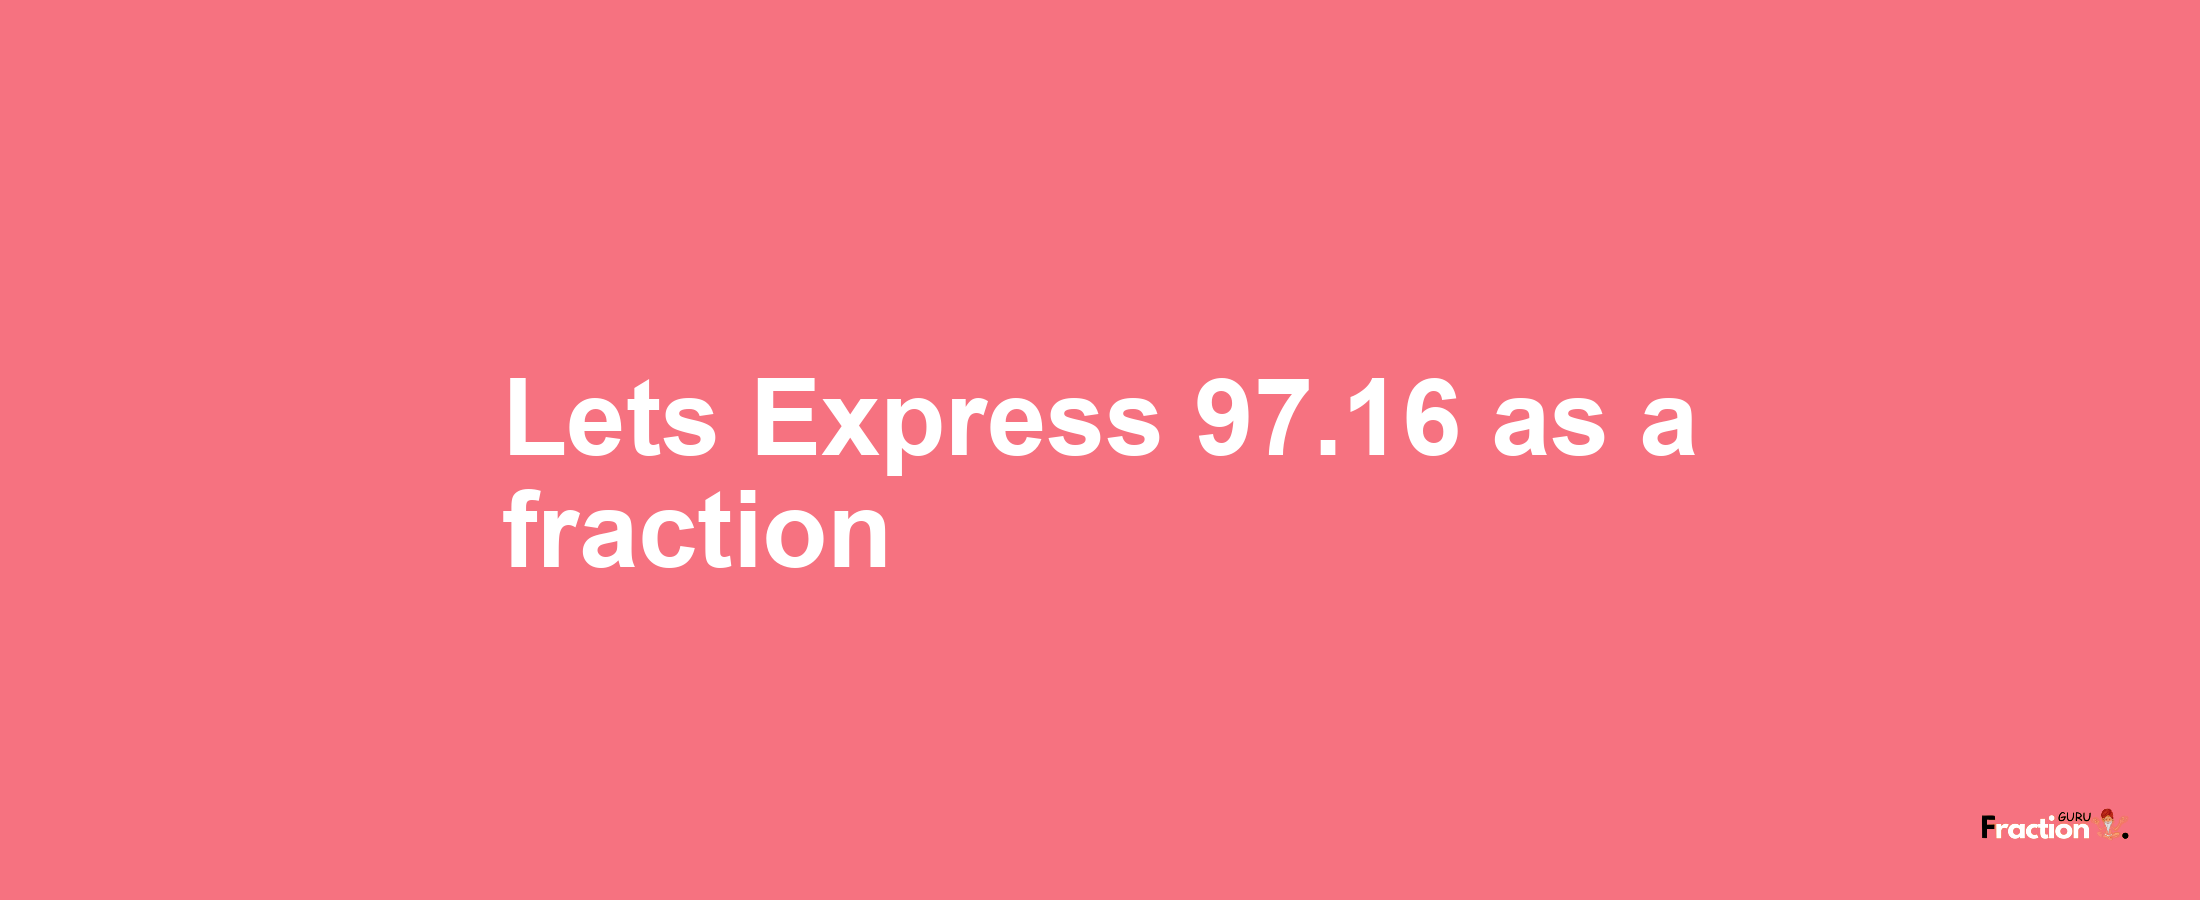 Lets Express 97.16 as afraction